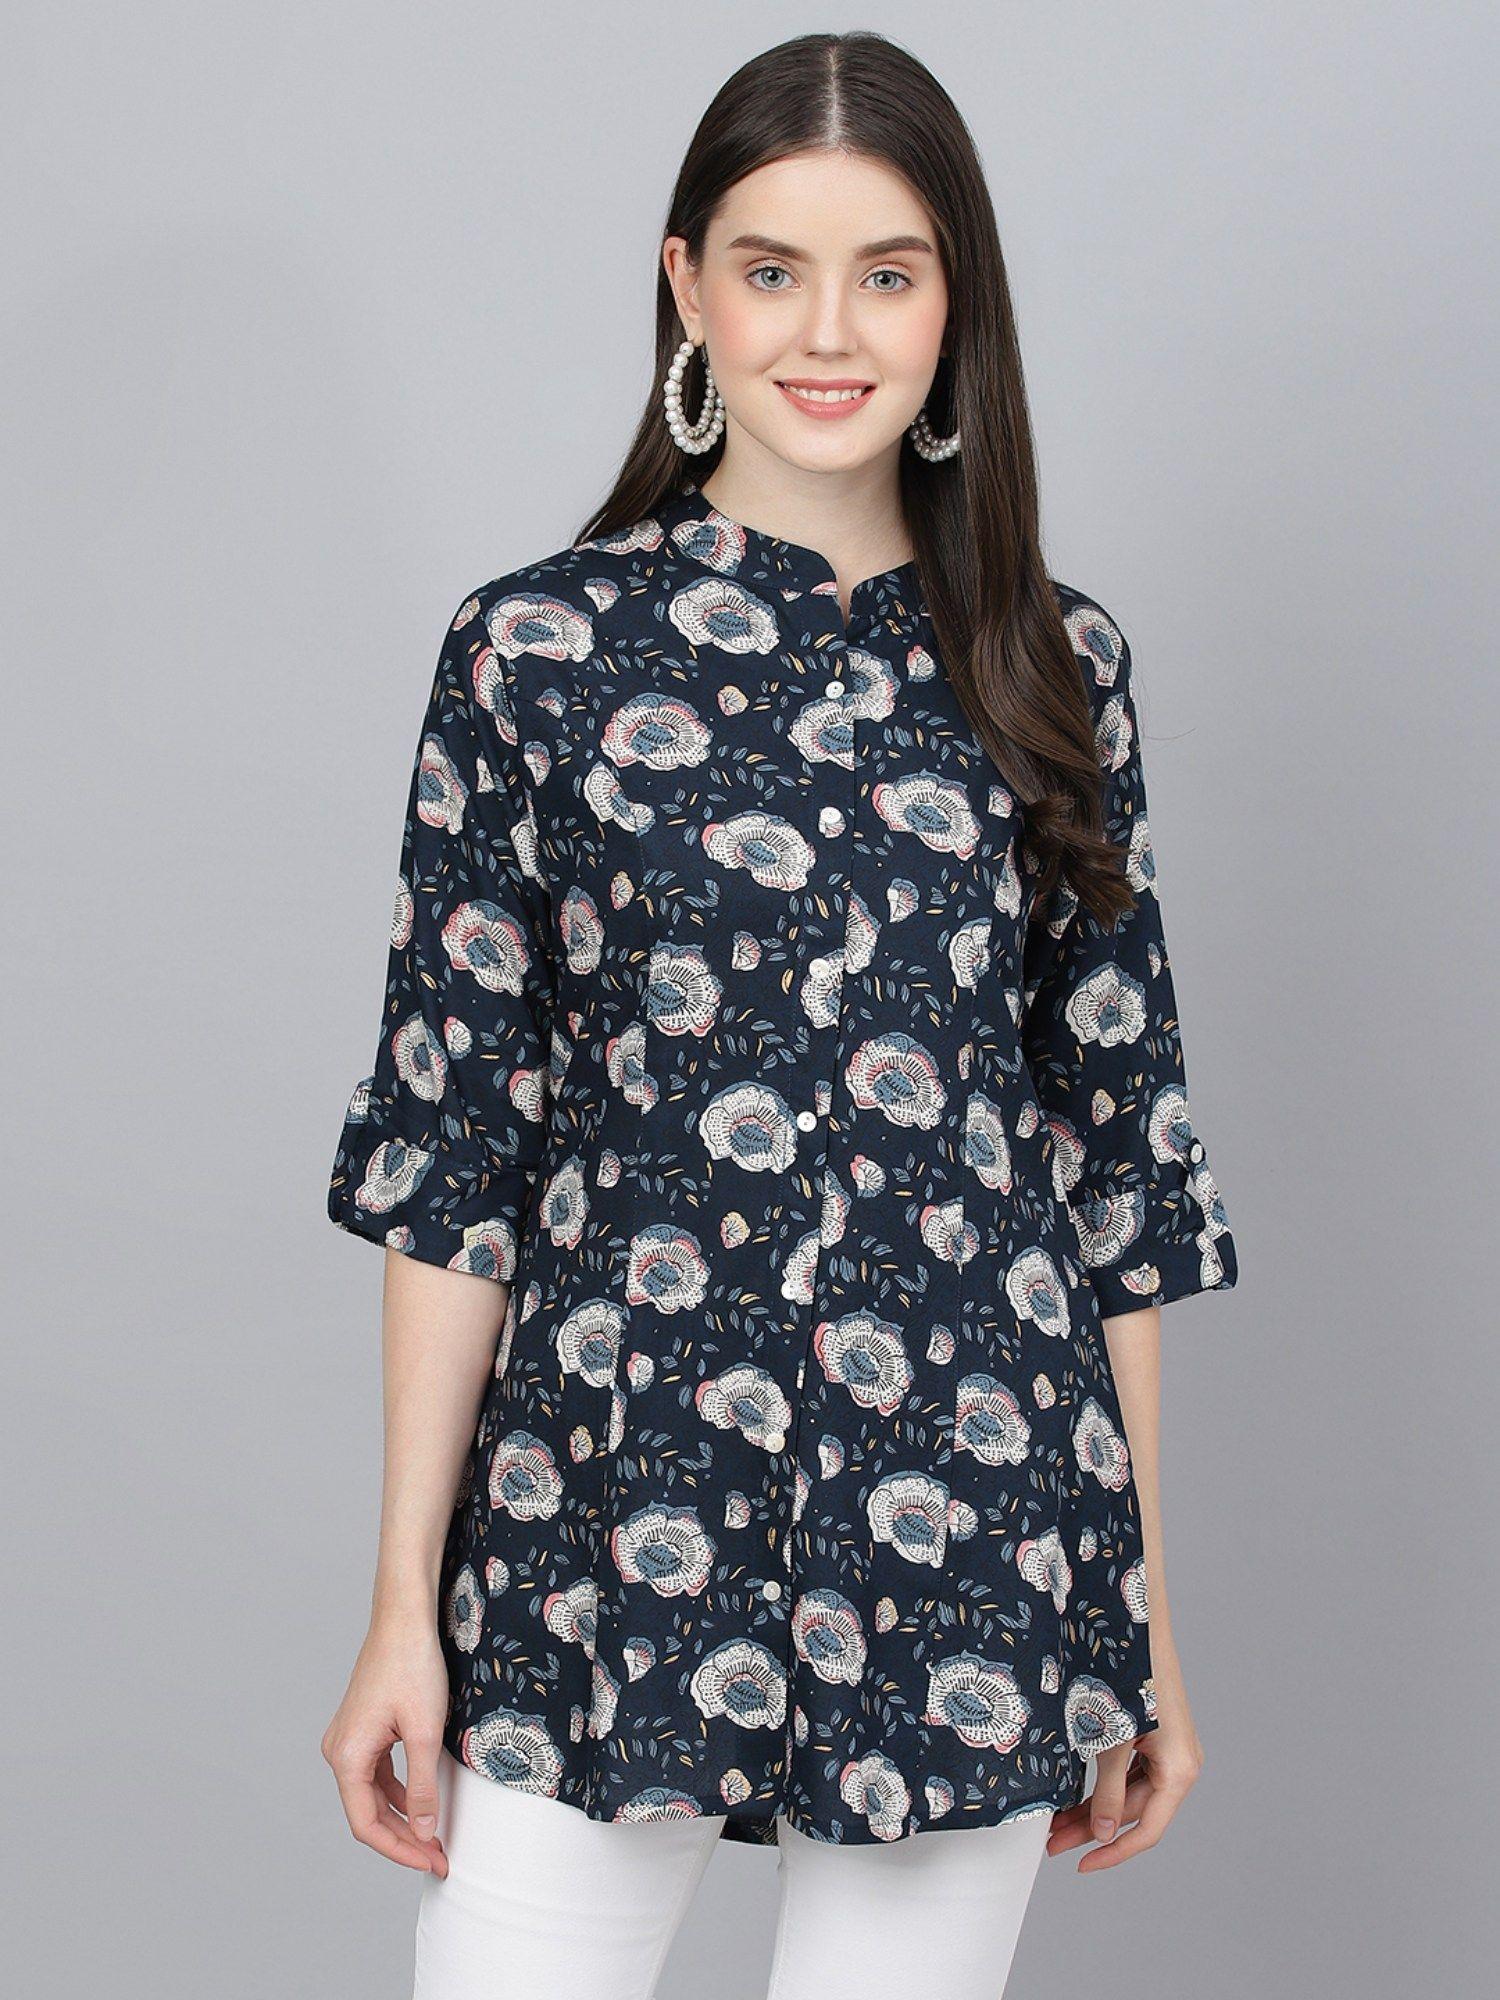 blue floral printed rayon a-line shirts style top